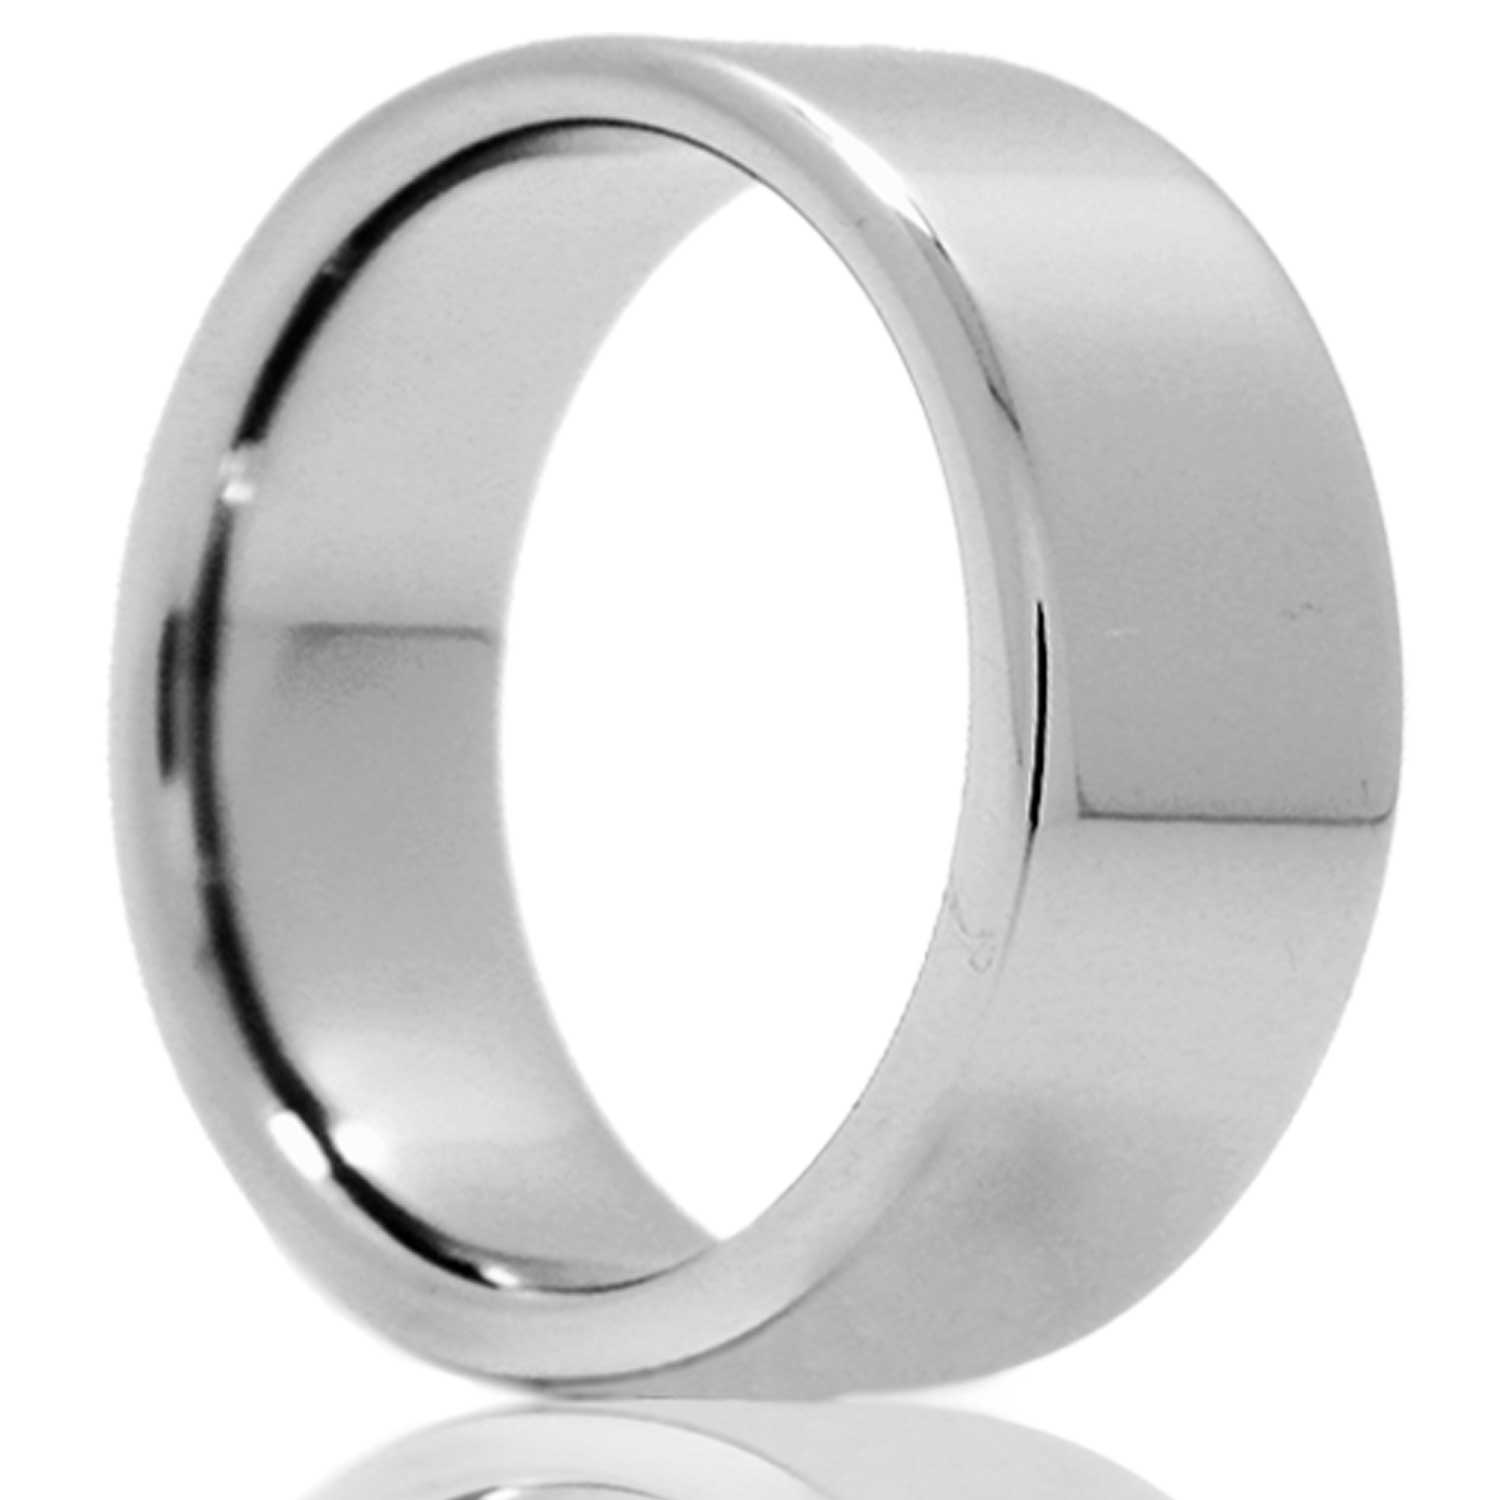 A tantalum wedding band displayed on a neutral white background.